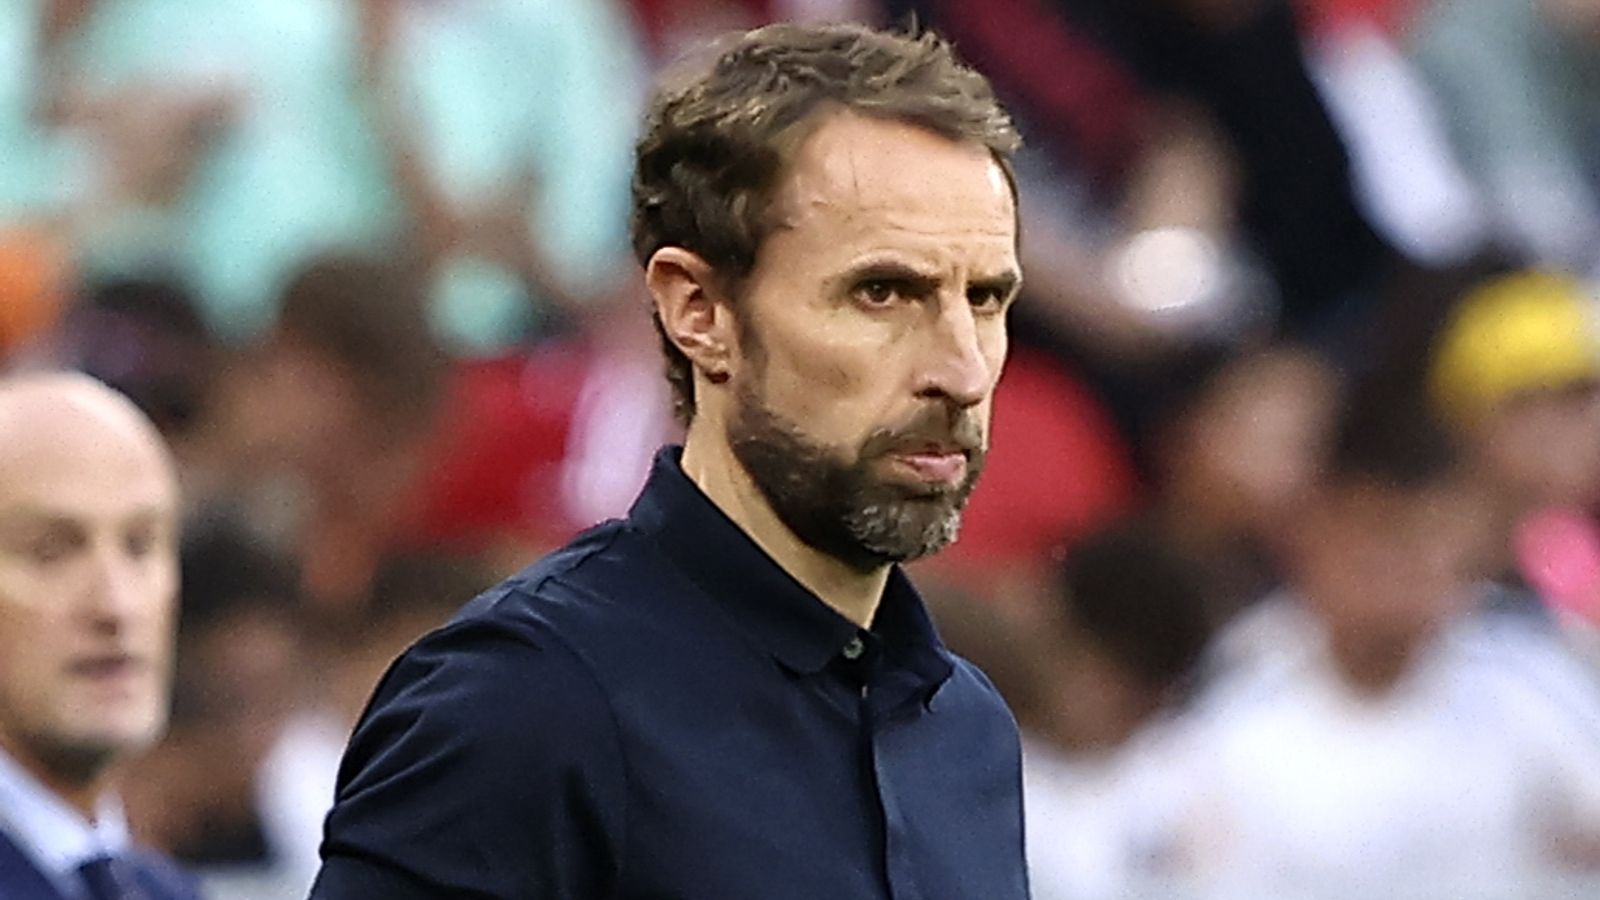 Gareth Southgate insists he is right person to lead England to World Cup in Qatar